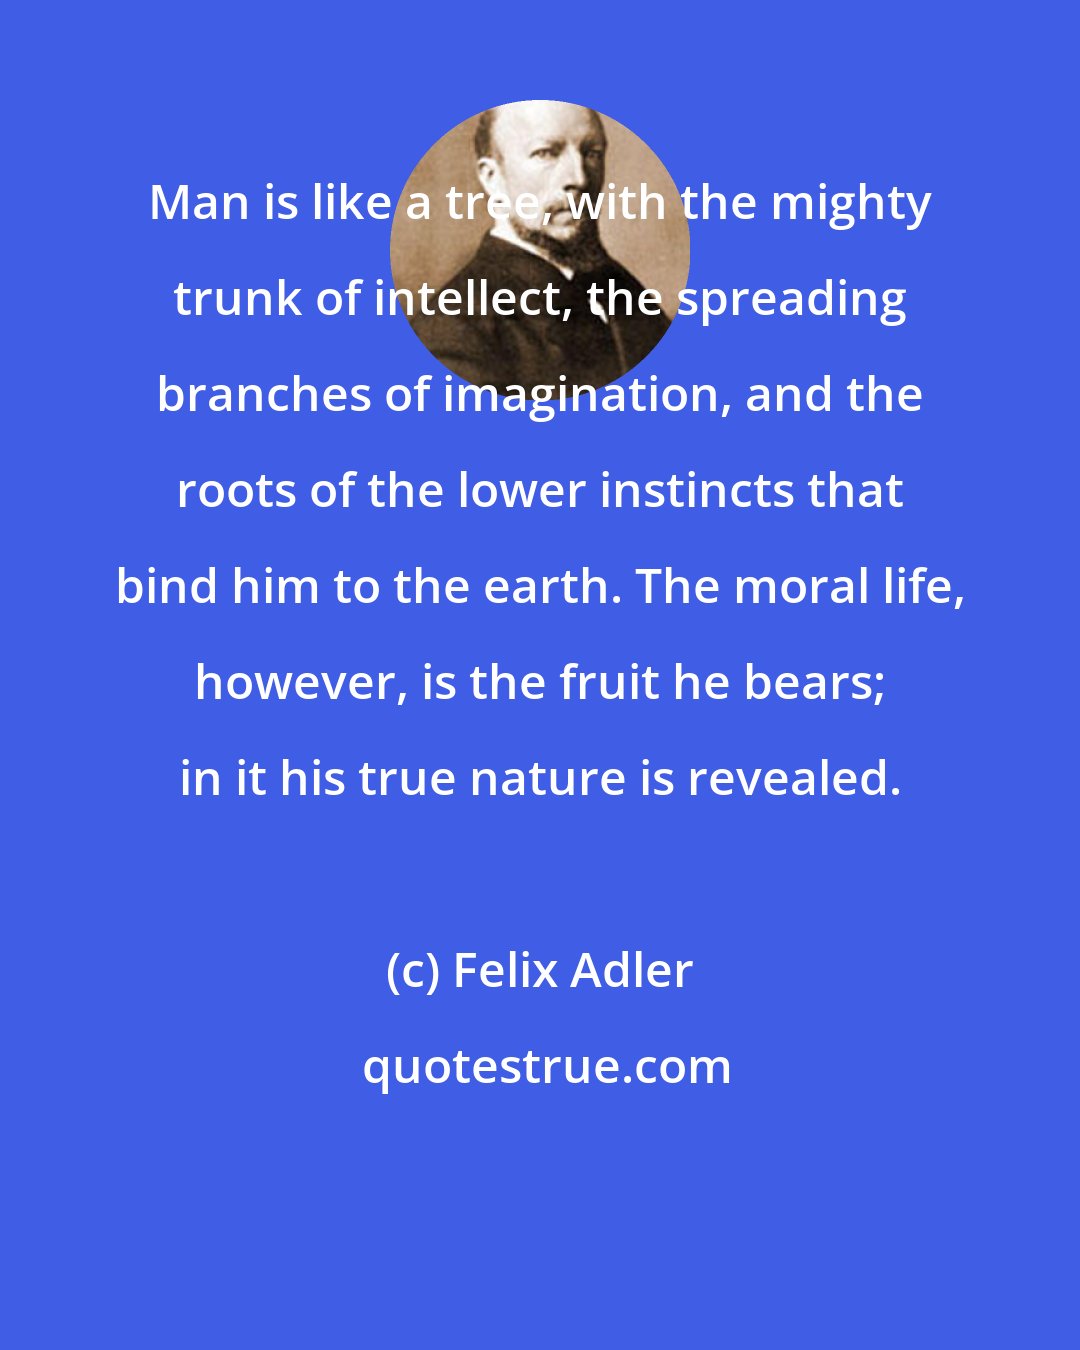 Felix Adler: Man is like a tree, with the mighty trunk of intellect, the spreading branches of imagination, and the roots of the lower instincts that bind him to the earth. The moral life, however, is the fruit he bears; in it his true nature is revealed.